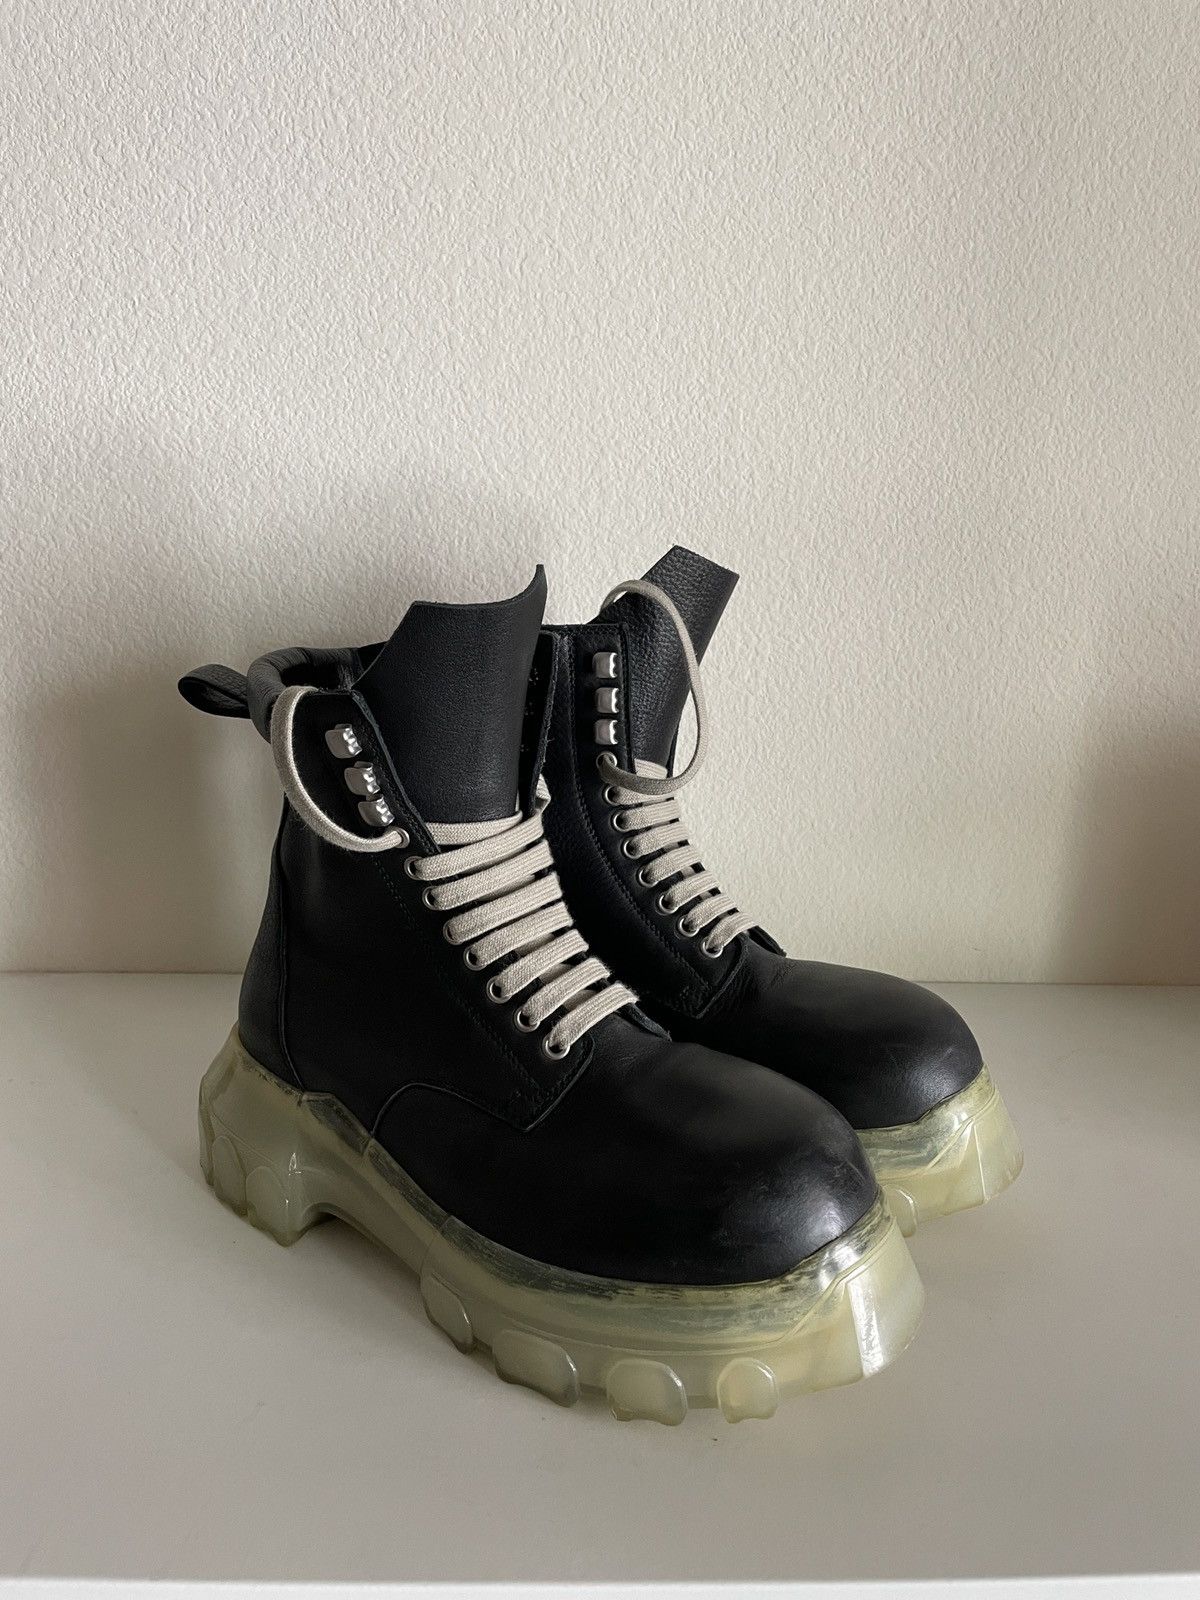 Rick Owens Rick Owens Bozo Tractor Boots | Grailed